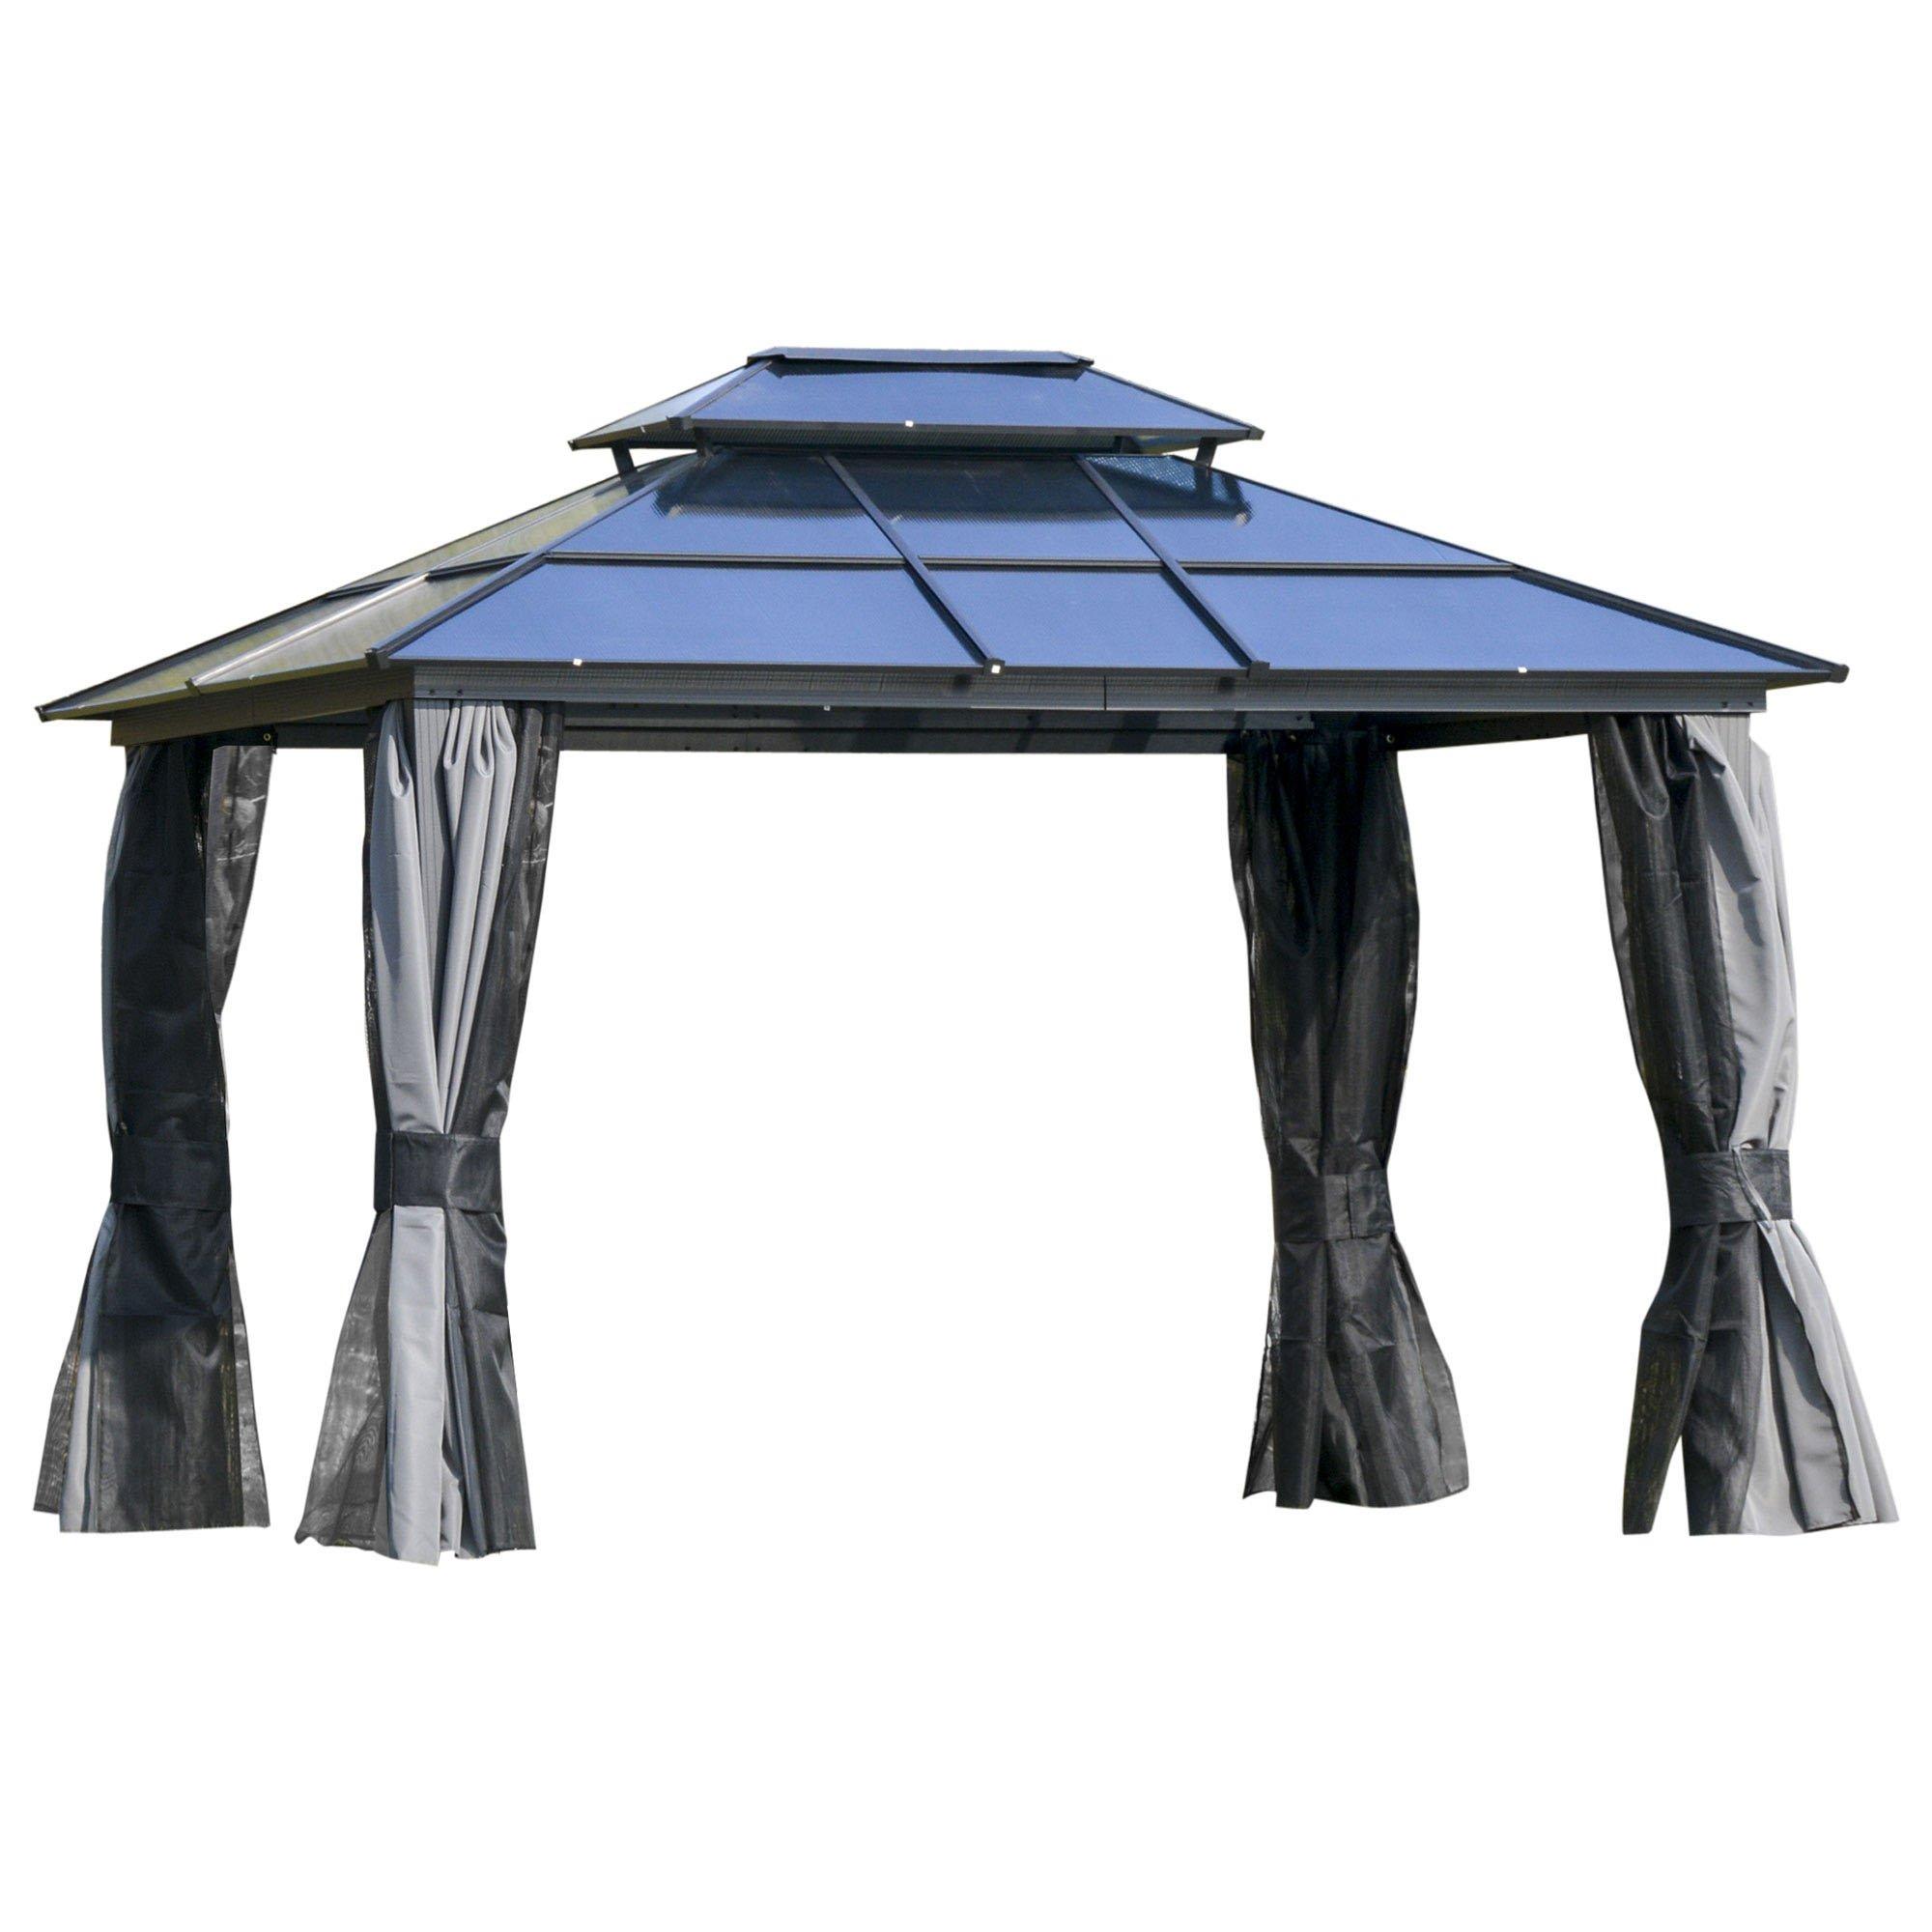 Polycarbonate Hardtop Gazebo With Double Roof And Aluminium Frame